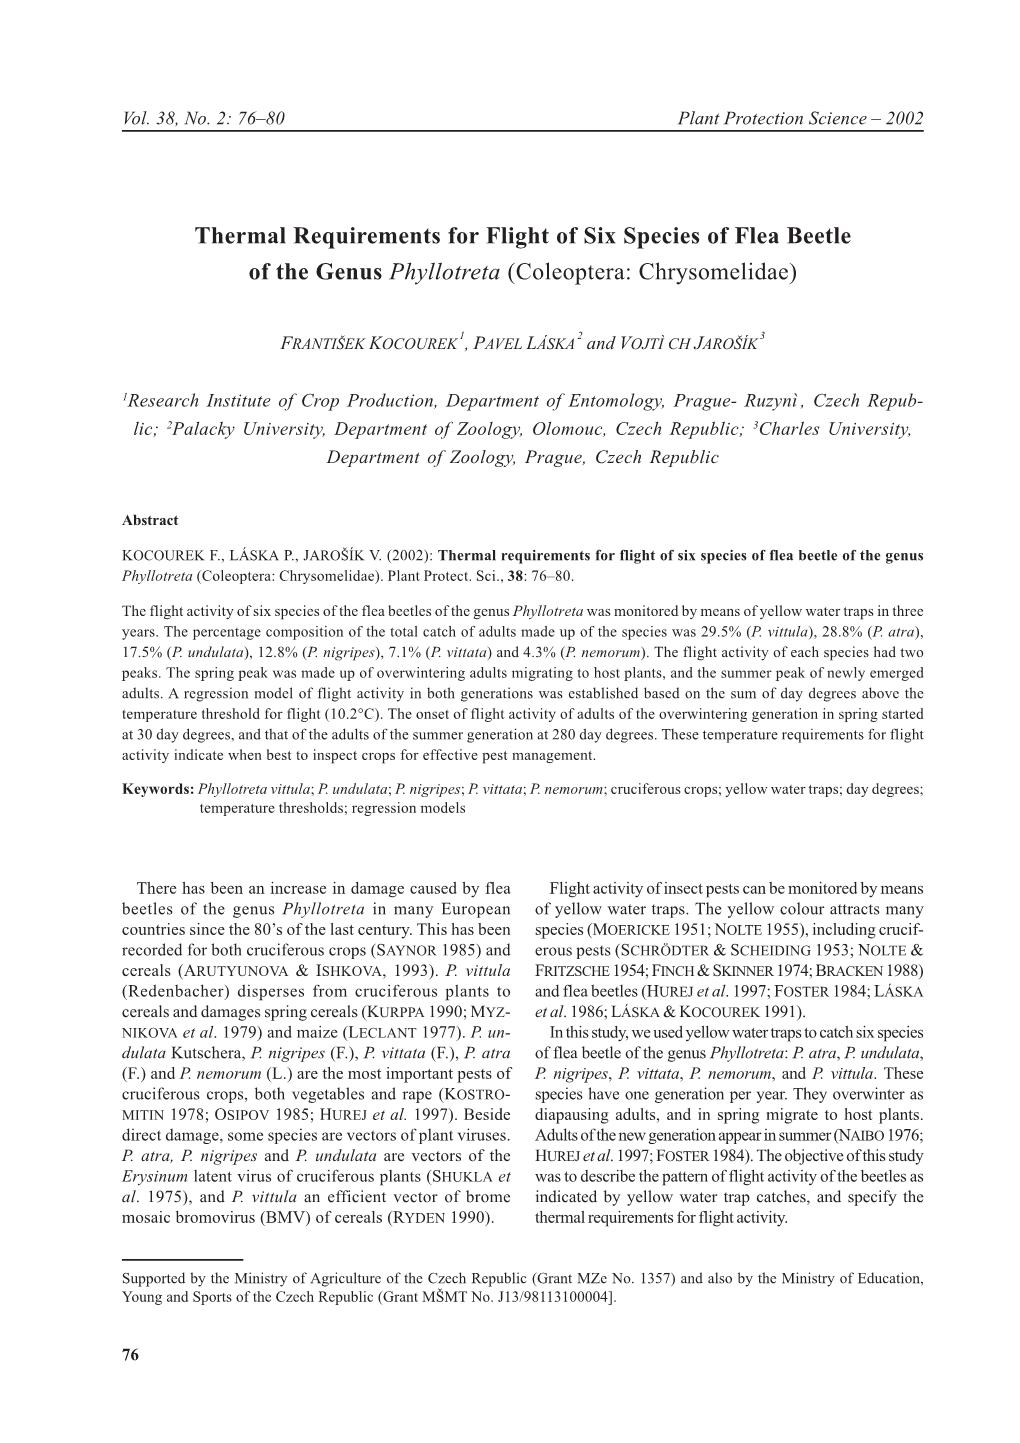 Thermal Requirements for Flight of Six Species of Flea Beetle of the Genus Phyllotreta (Coleoptera: Chrysomelidae)